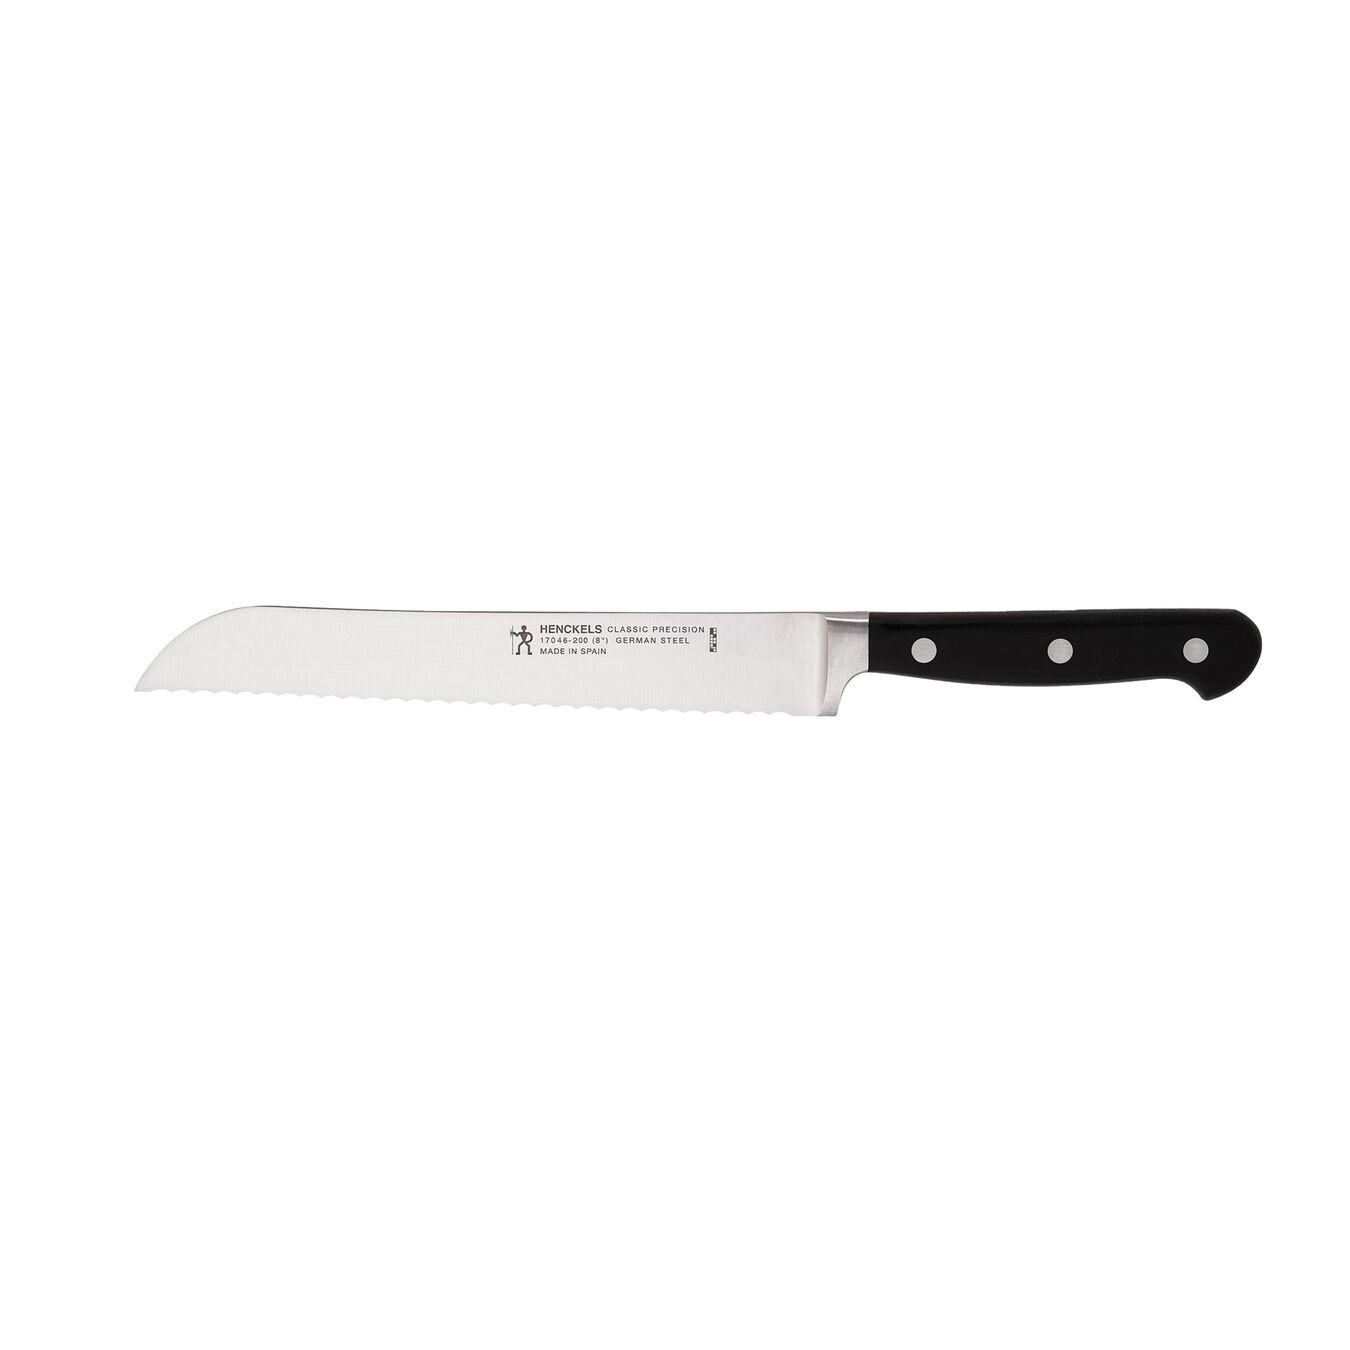 8-inch, Bread knife,,large 1